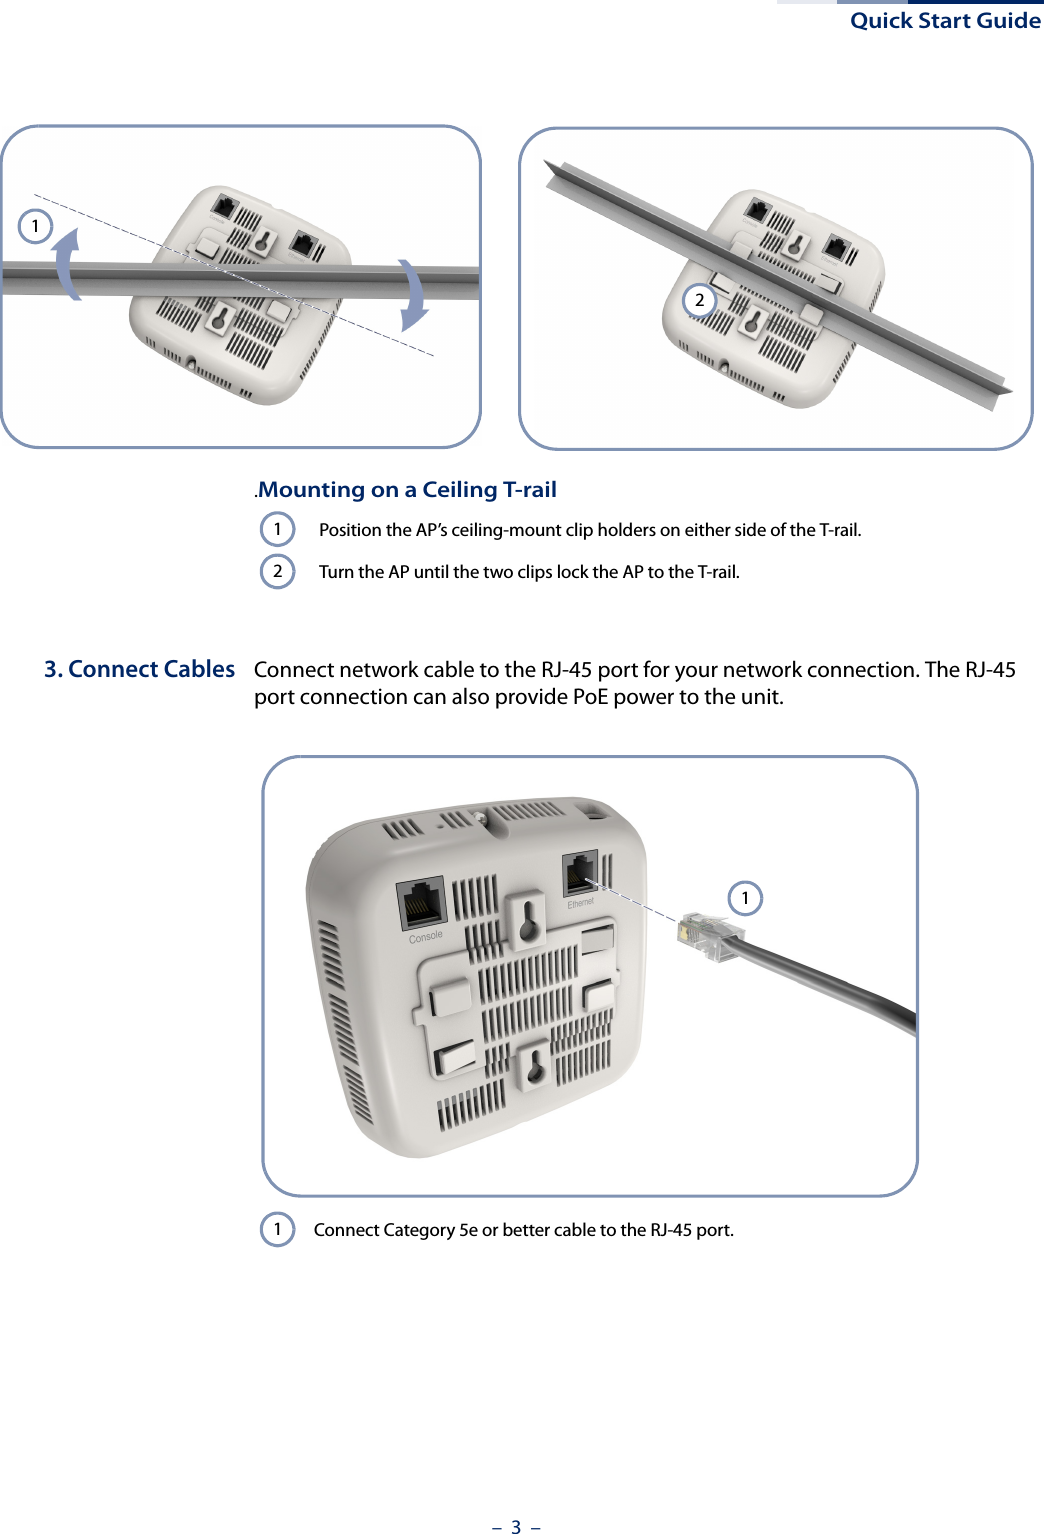 Quick Start Guide–  3  –3. Connect Cables Connect network cable to the RJ-45 port for your network connection. The RJ-45 port connection can also provide PoE power to the unit.12.Mounting on a Ceiling T-railPosition the AP’s ceiling-mount clip holders on either side of the T-rail.Turn the AP until the two clips lock the AP to the T-rail.12Connect Category 5e or better cable to the RJ-45 port.11